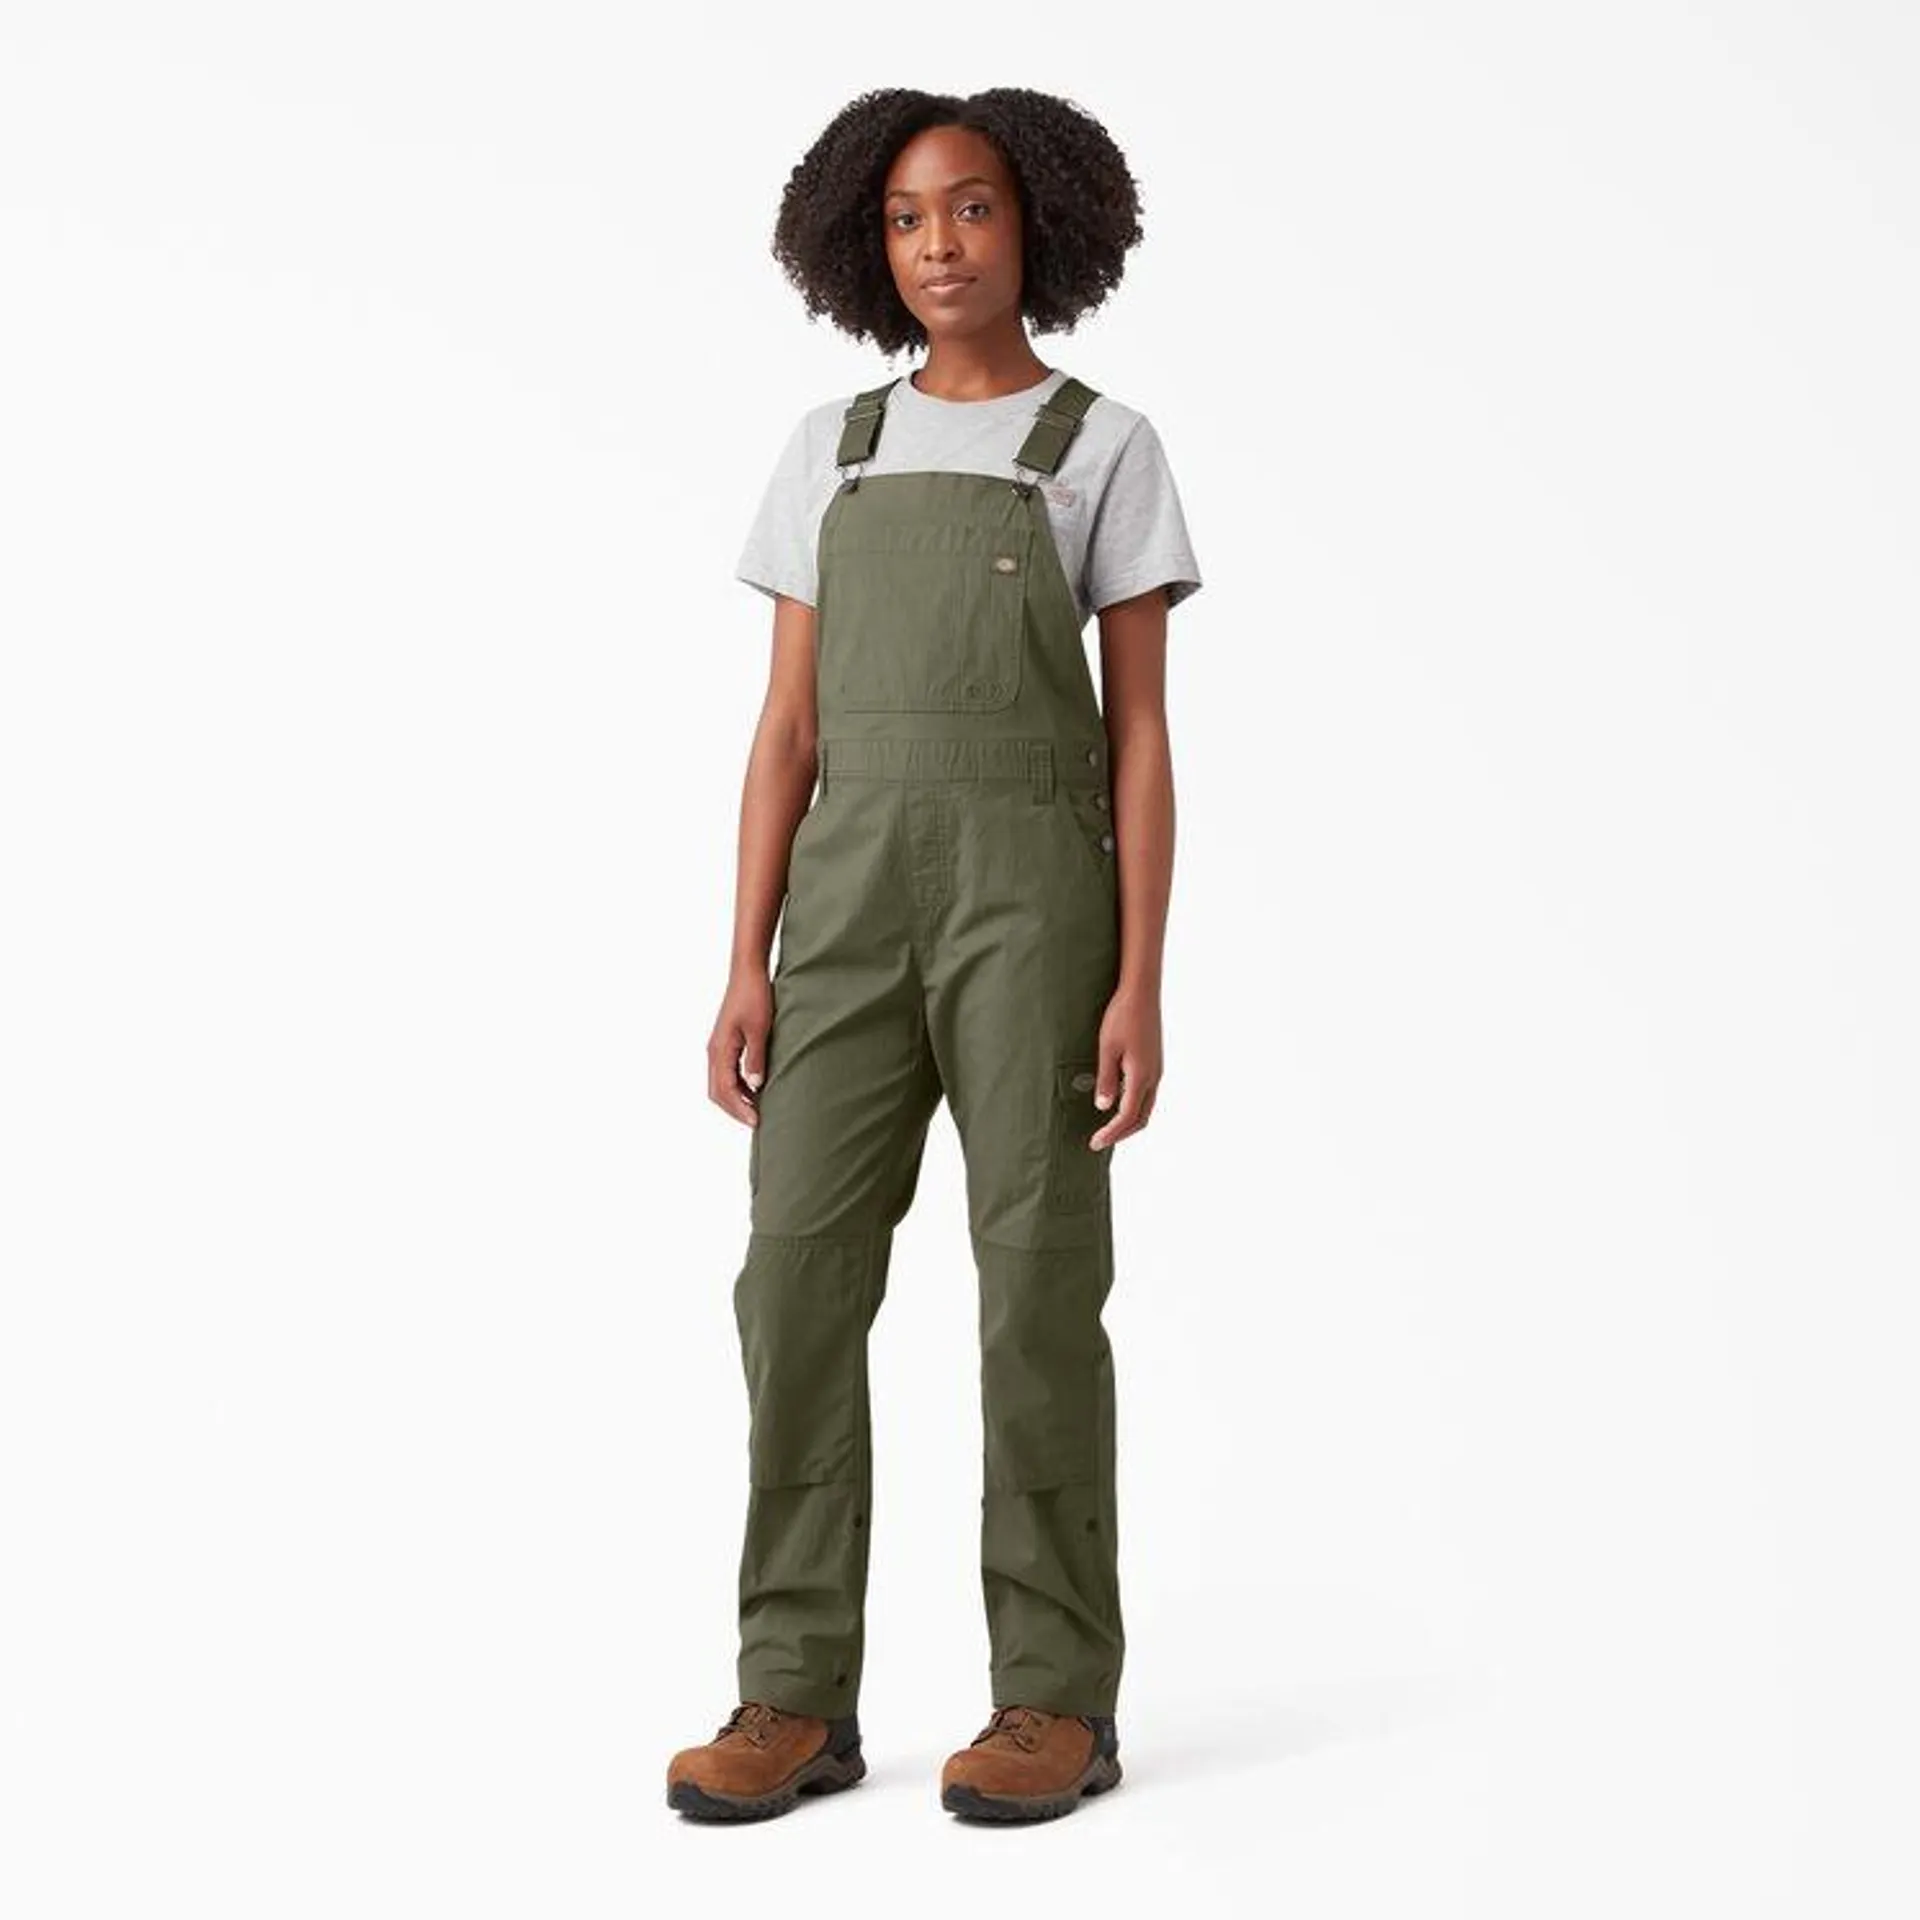 Women's Cooling Ripstop Bib Overalls, Rinsed Military Green